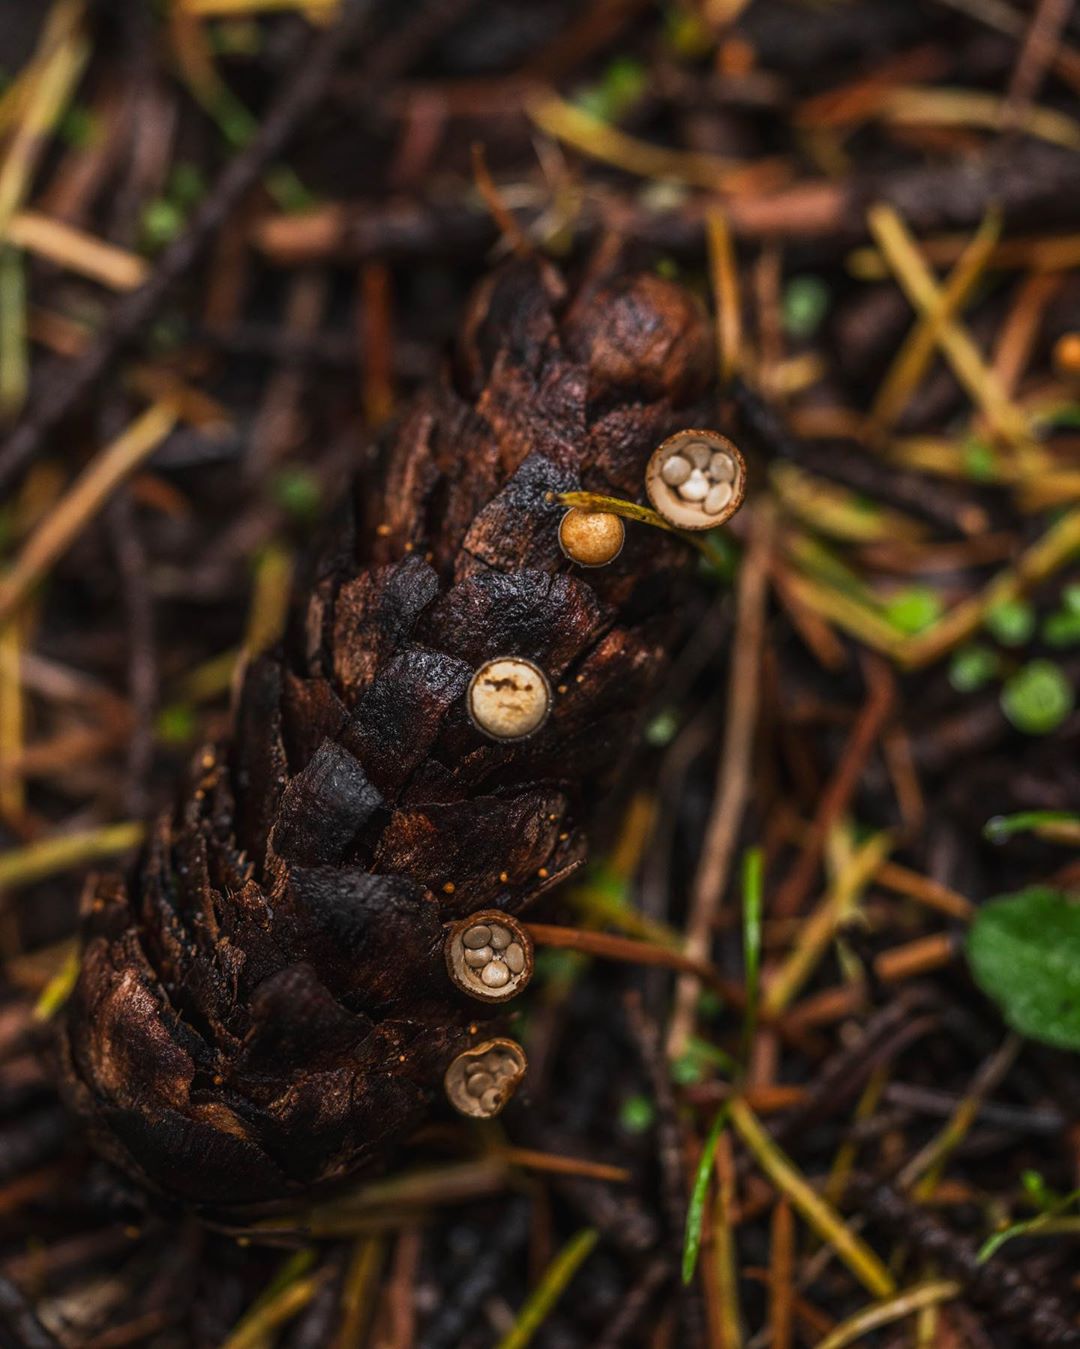 Brown fir cone lying on sticks and mud with mushroom called birds nest fungi sticking to the fir cone, in small round cups